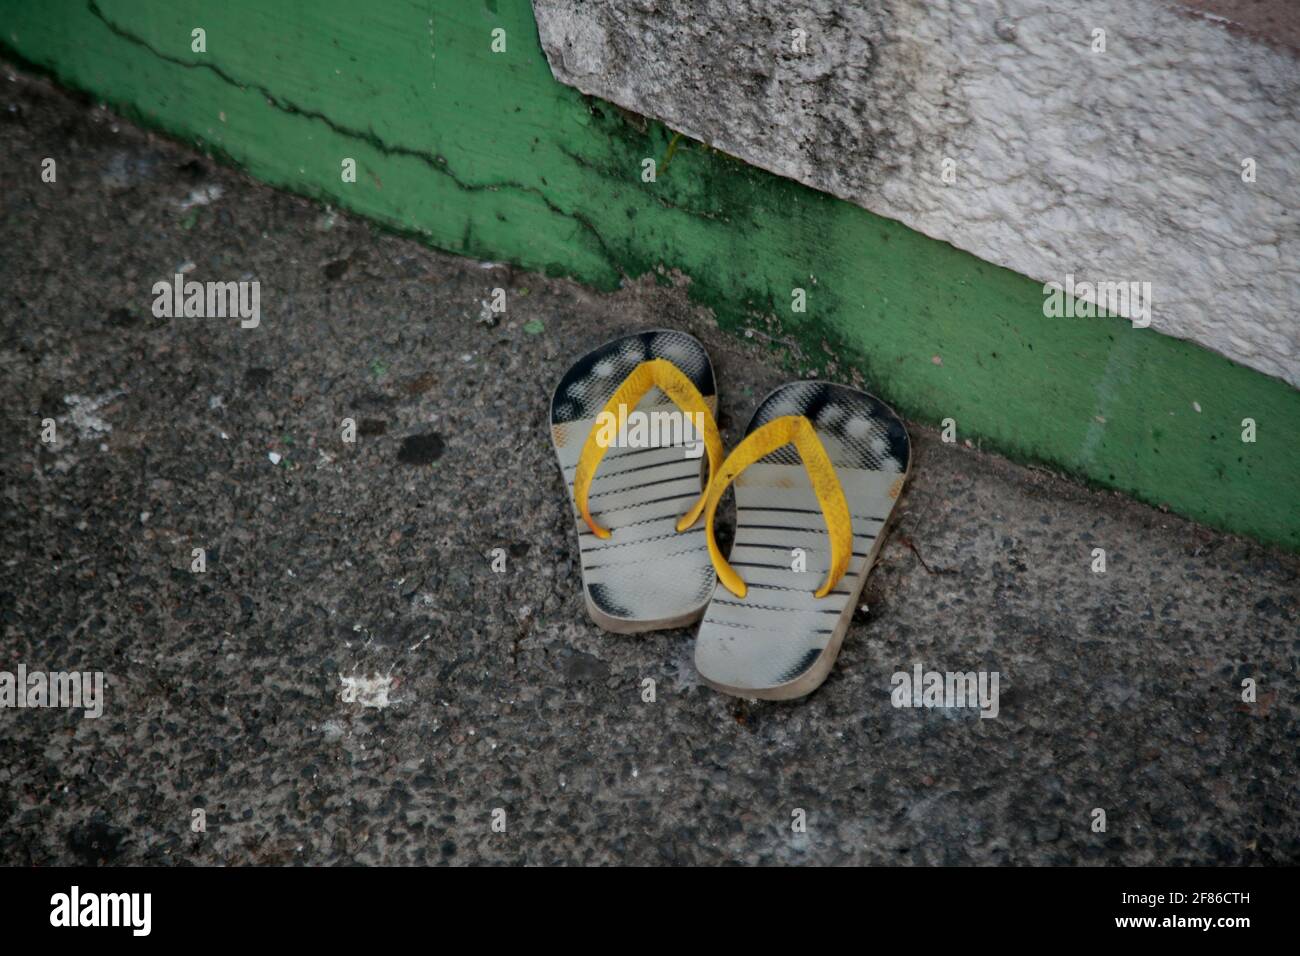 salvador, bahia, brazil - december 16, 2020: old rubber sandals are seen abandoned on a sidewalk in the city of Salvador. *** Local Caption *** Stock Photo